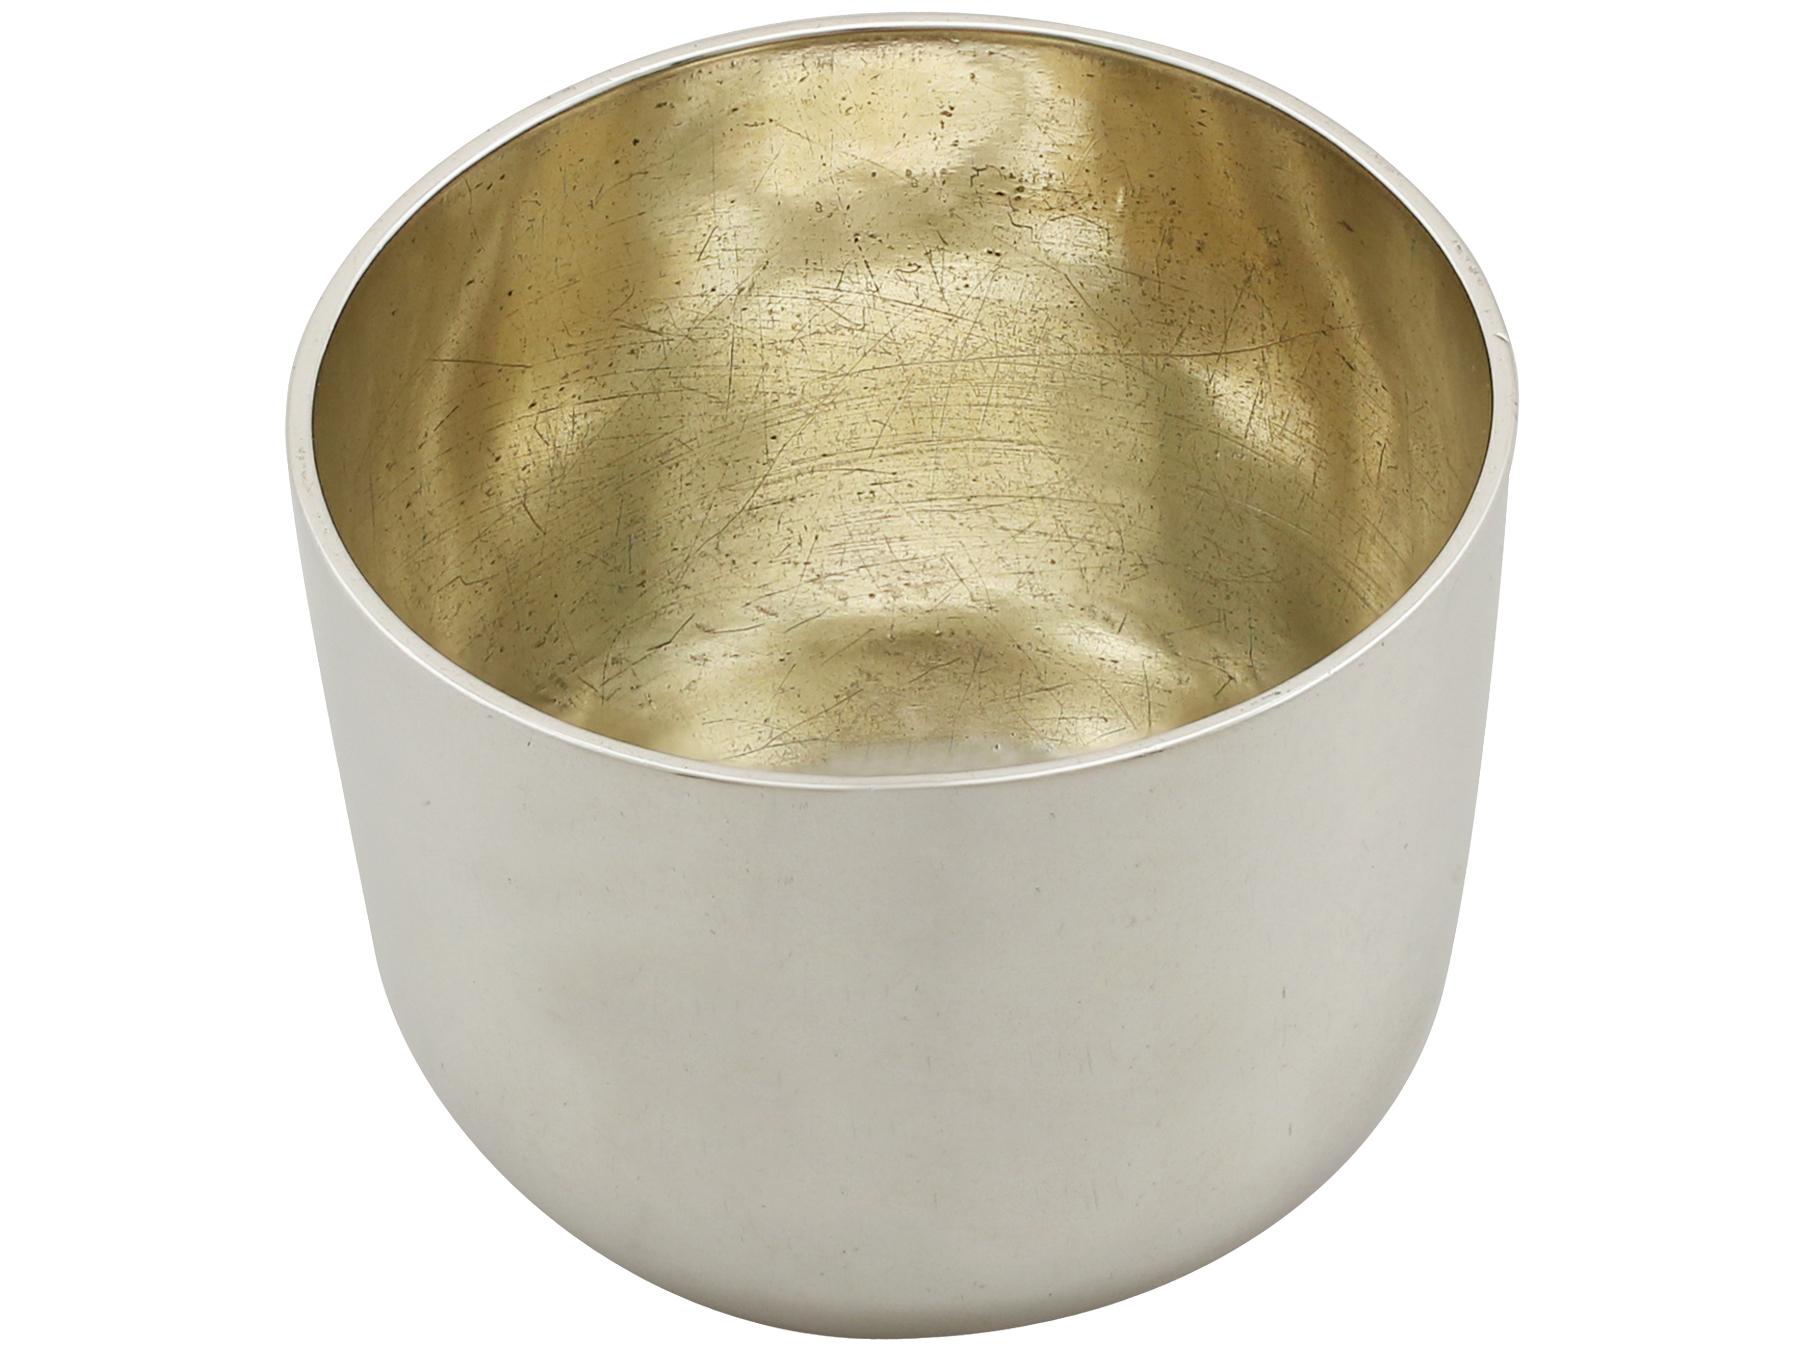 A fine antique Georgian English sterling silver tumbler cup; part of our dining silverware collection

This impressive antique Georgian sterling silver tumbler cup has a plain circular rounded form.

The surface of this George II cup is plain